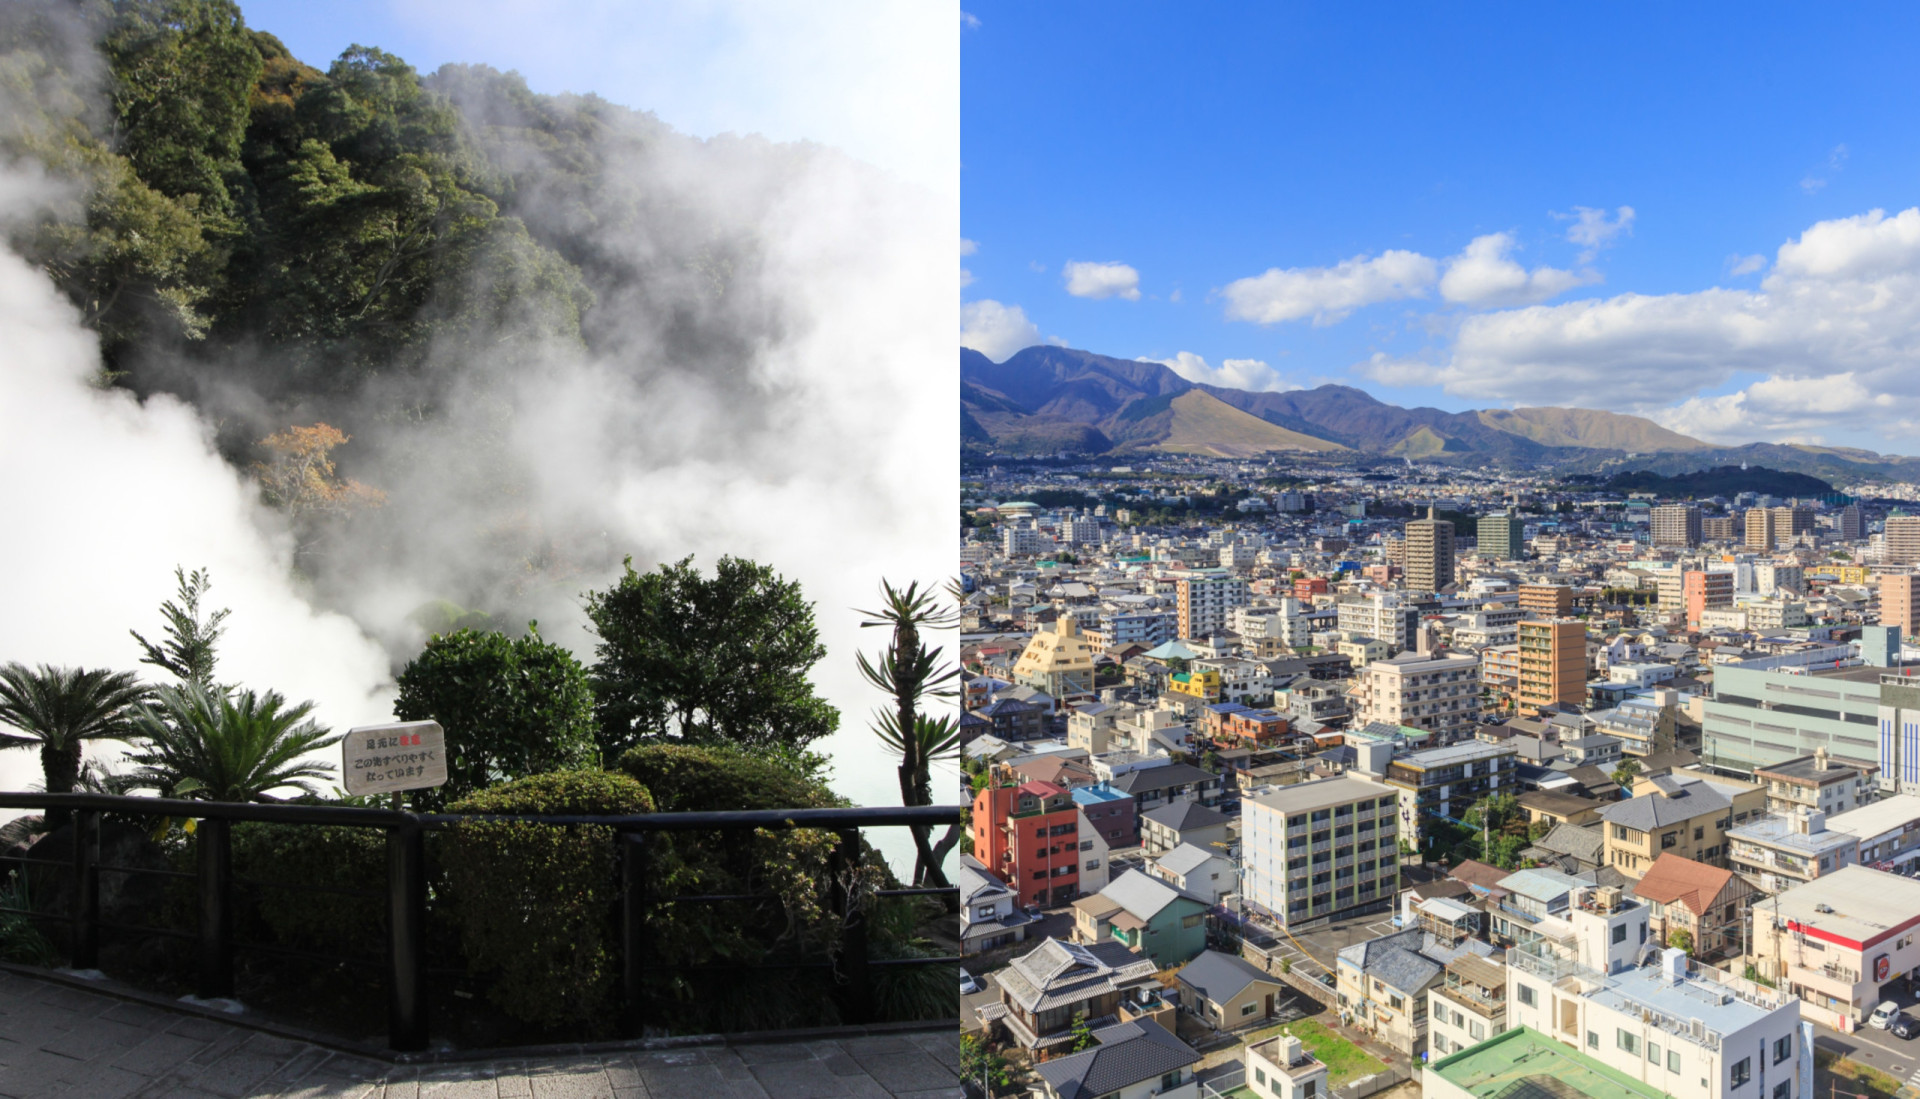 <p>Here's an unusual trip: a Japanese city that looks like it was built right above hell itself! Here visitors can see hot steam rising out of the soil and waters all over the town. But don't worry, lots of people come to Beppu to relax!<br>Check out the gallery and see one of the most unique destinations in the world!</p><p>You may also like:<a href="https://www.starsinsider.com/n/158399?utm_source=msn.com&utm_medium=display&utm_campaign=referral_description&utm_content=183441v2en-ae"> Need to escape from the cold? Visit these warm US cities</a></p>